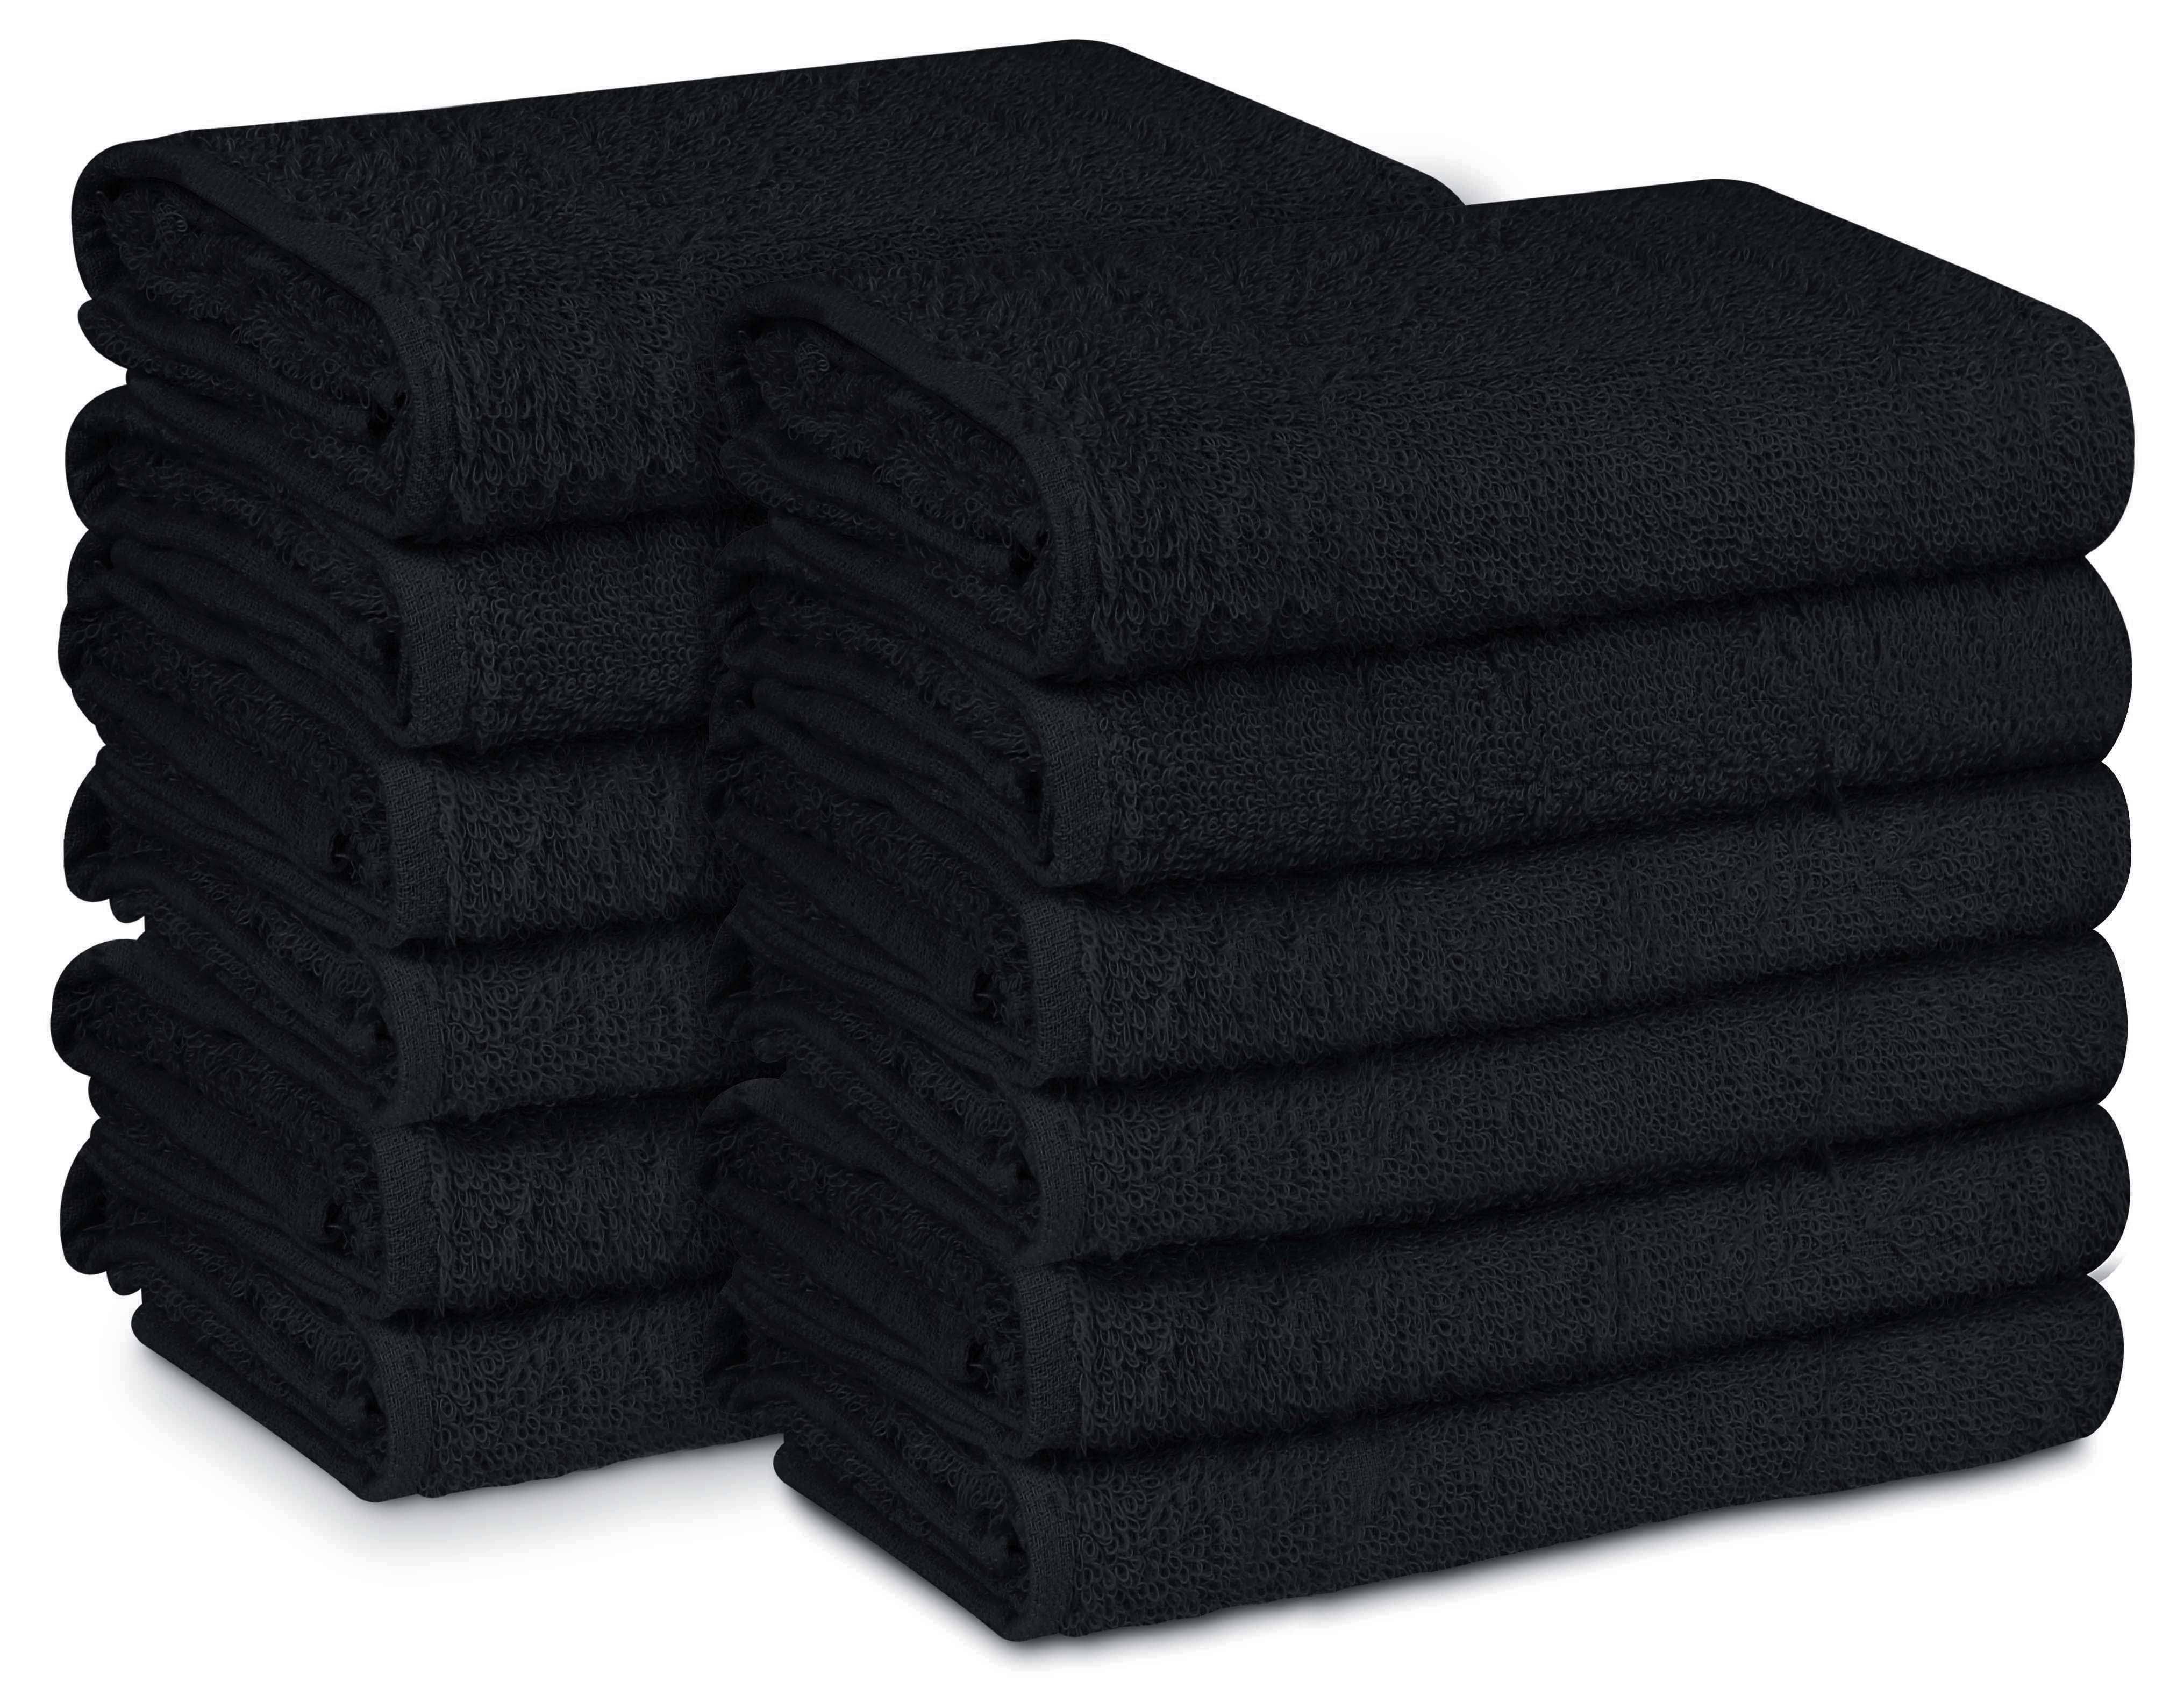 16x27 Details about   12 Pack of Antimicrobial Treated Microfiber Bleach Safe Salon Towels 